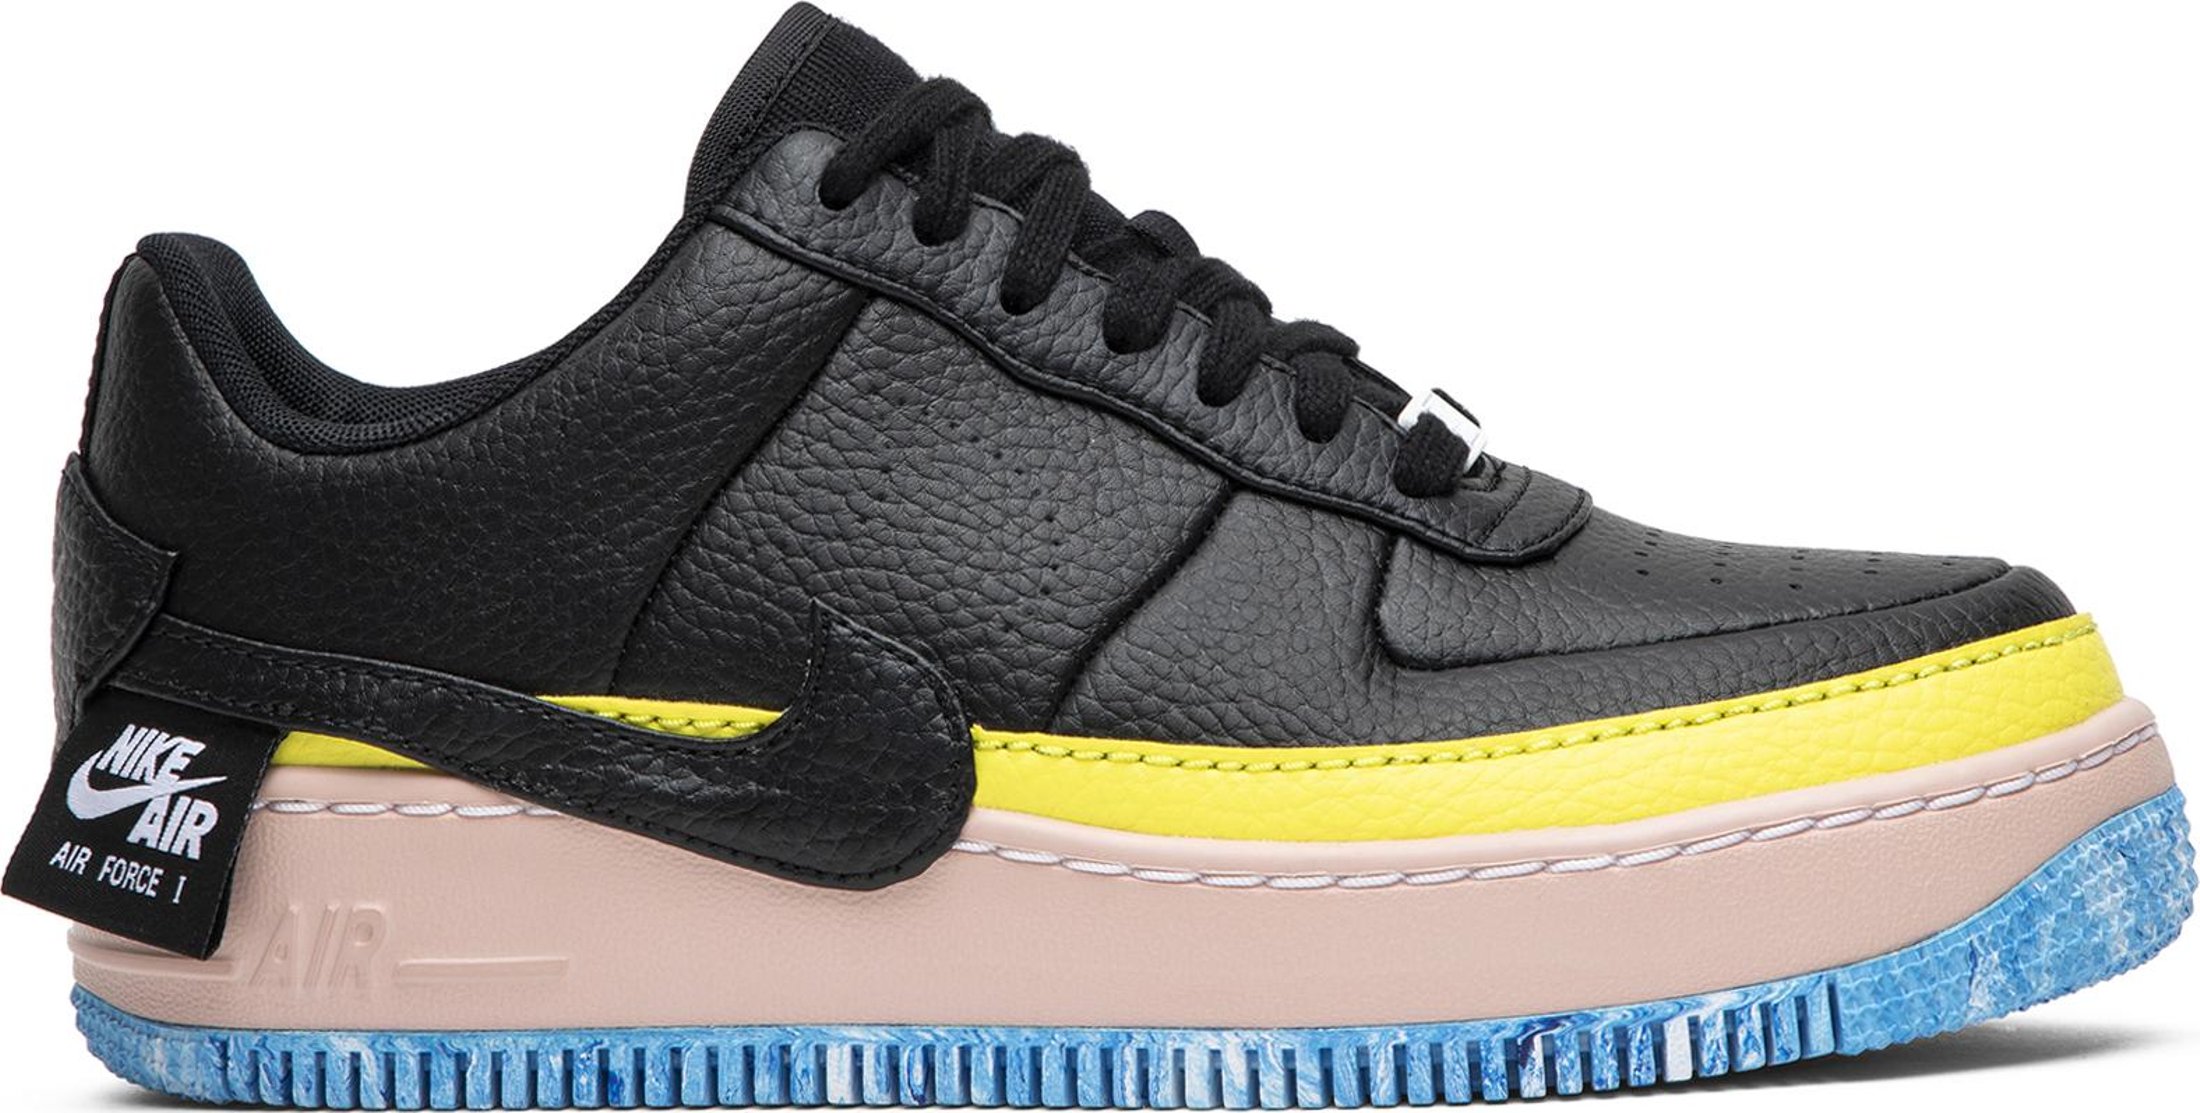 Buy Wmns Air Force 1 Jester 'Black' - AT2497 001 | GOAT